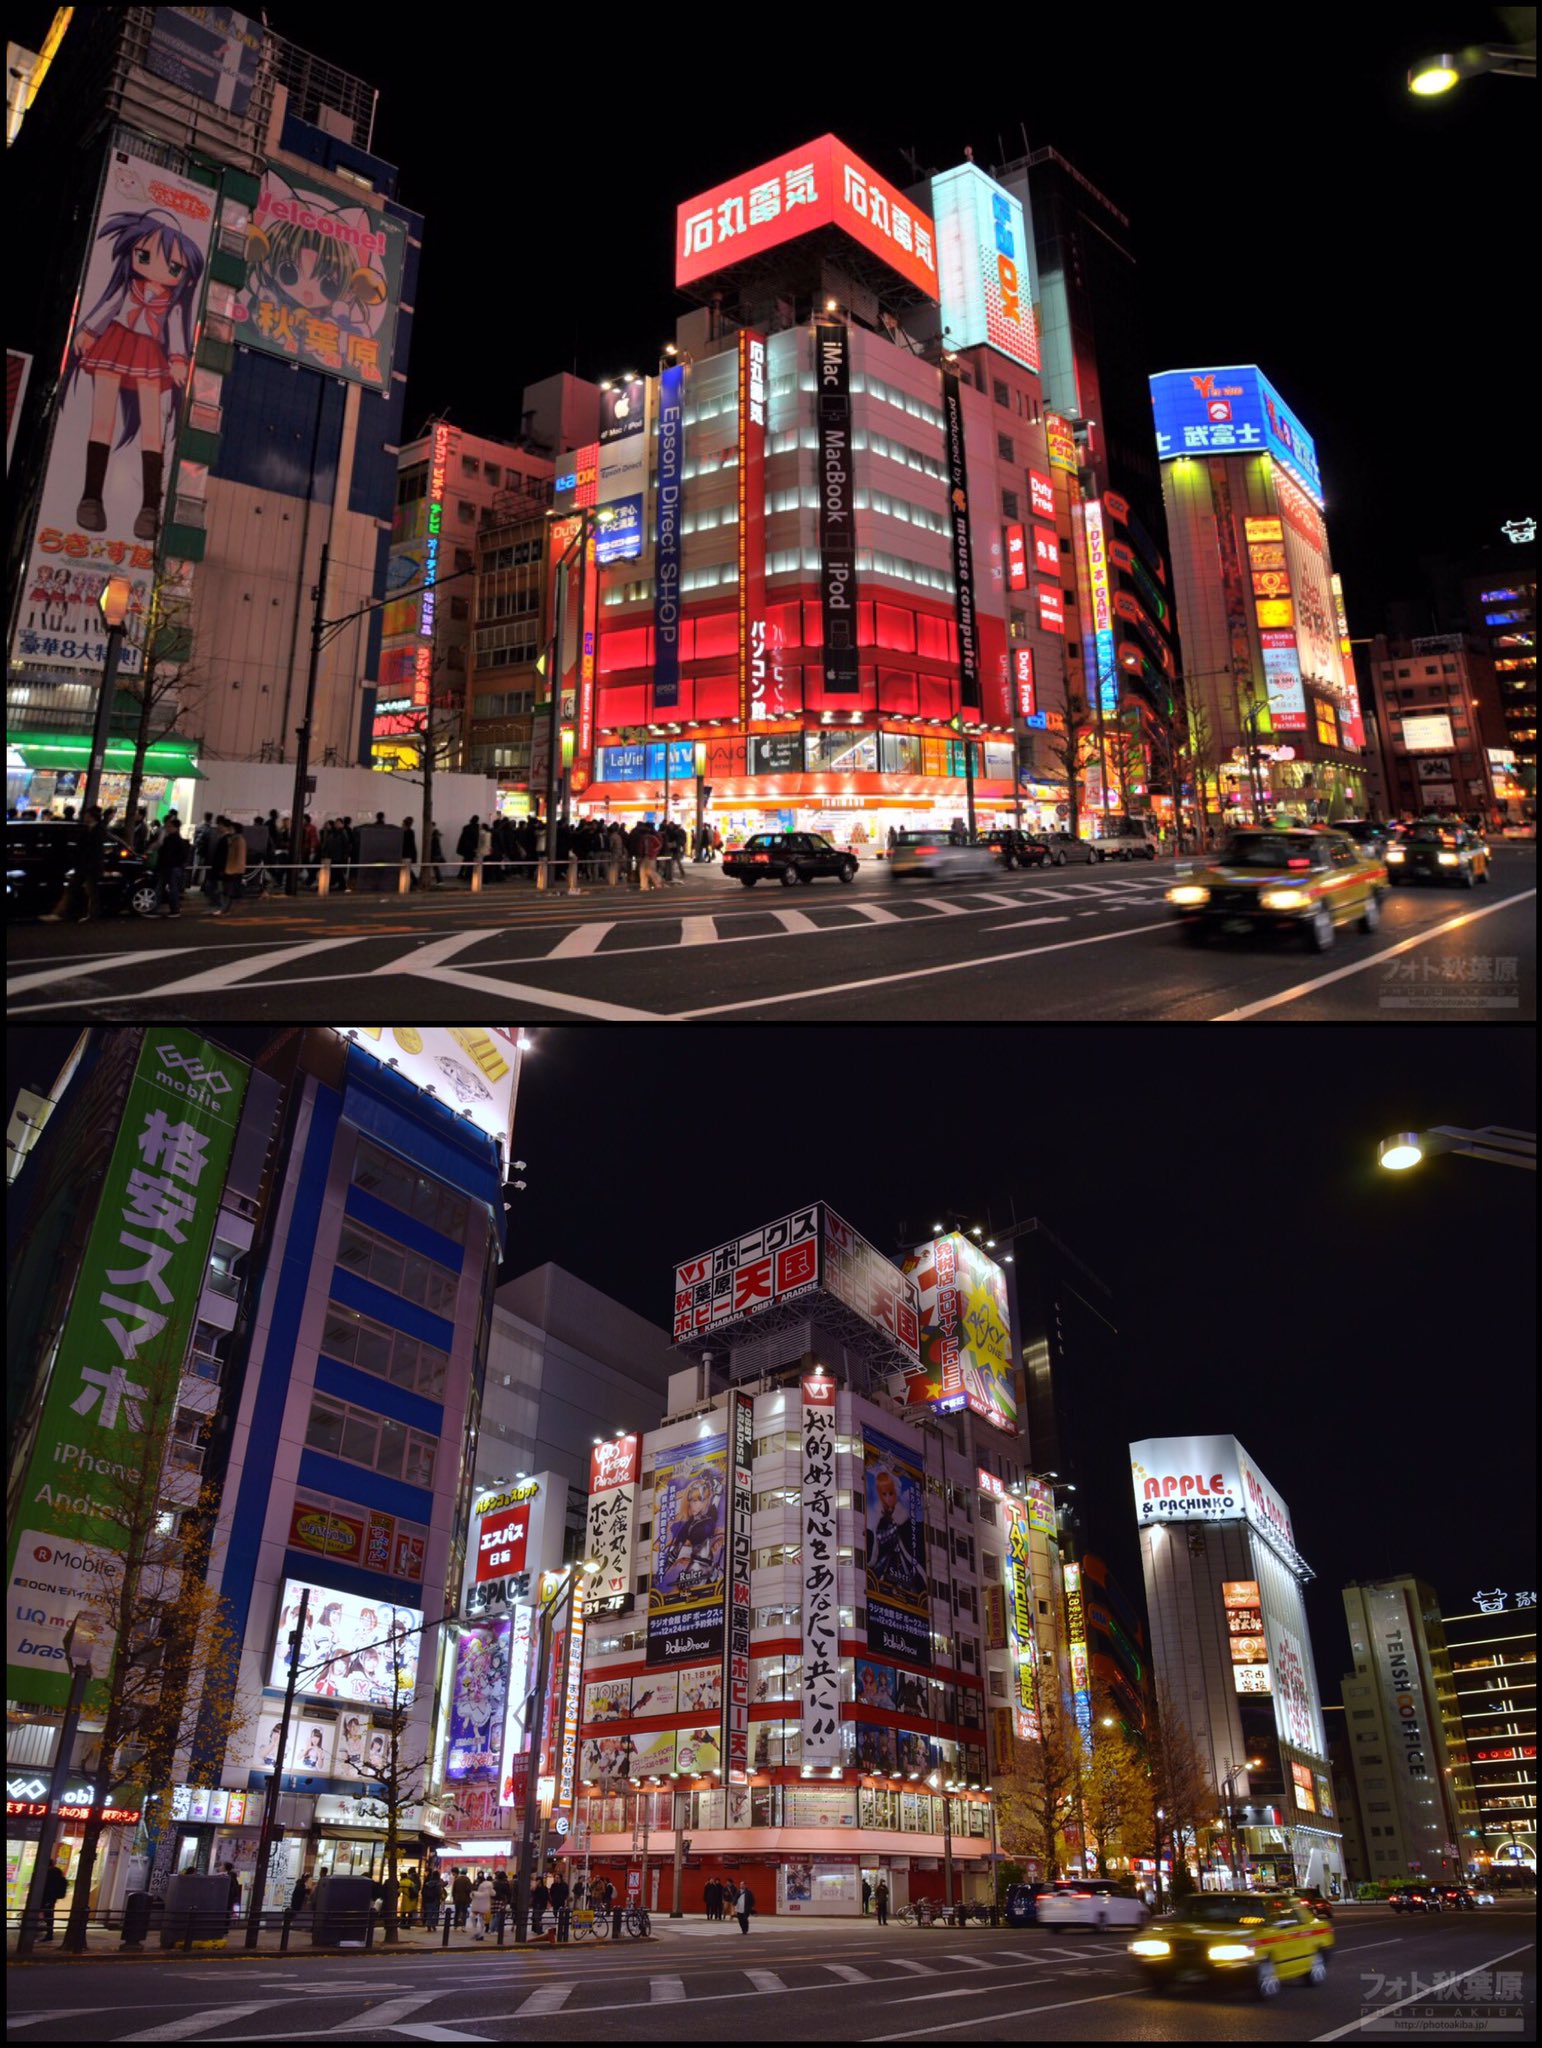 Do Media Consumers Actually Engage With Media - The Downfall of Akihabara